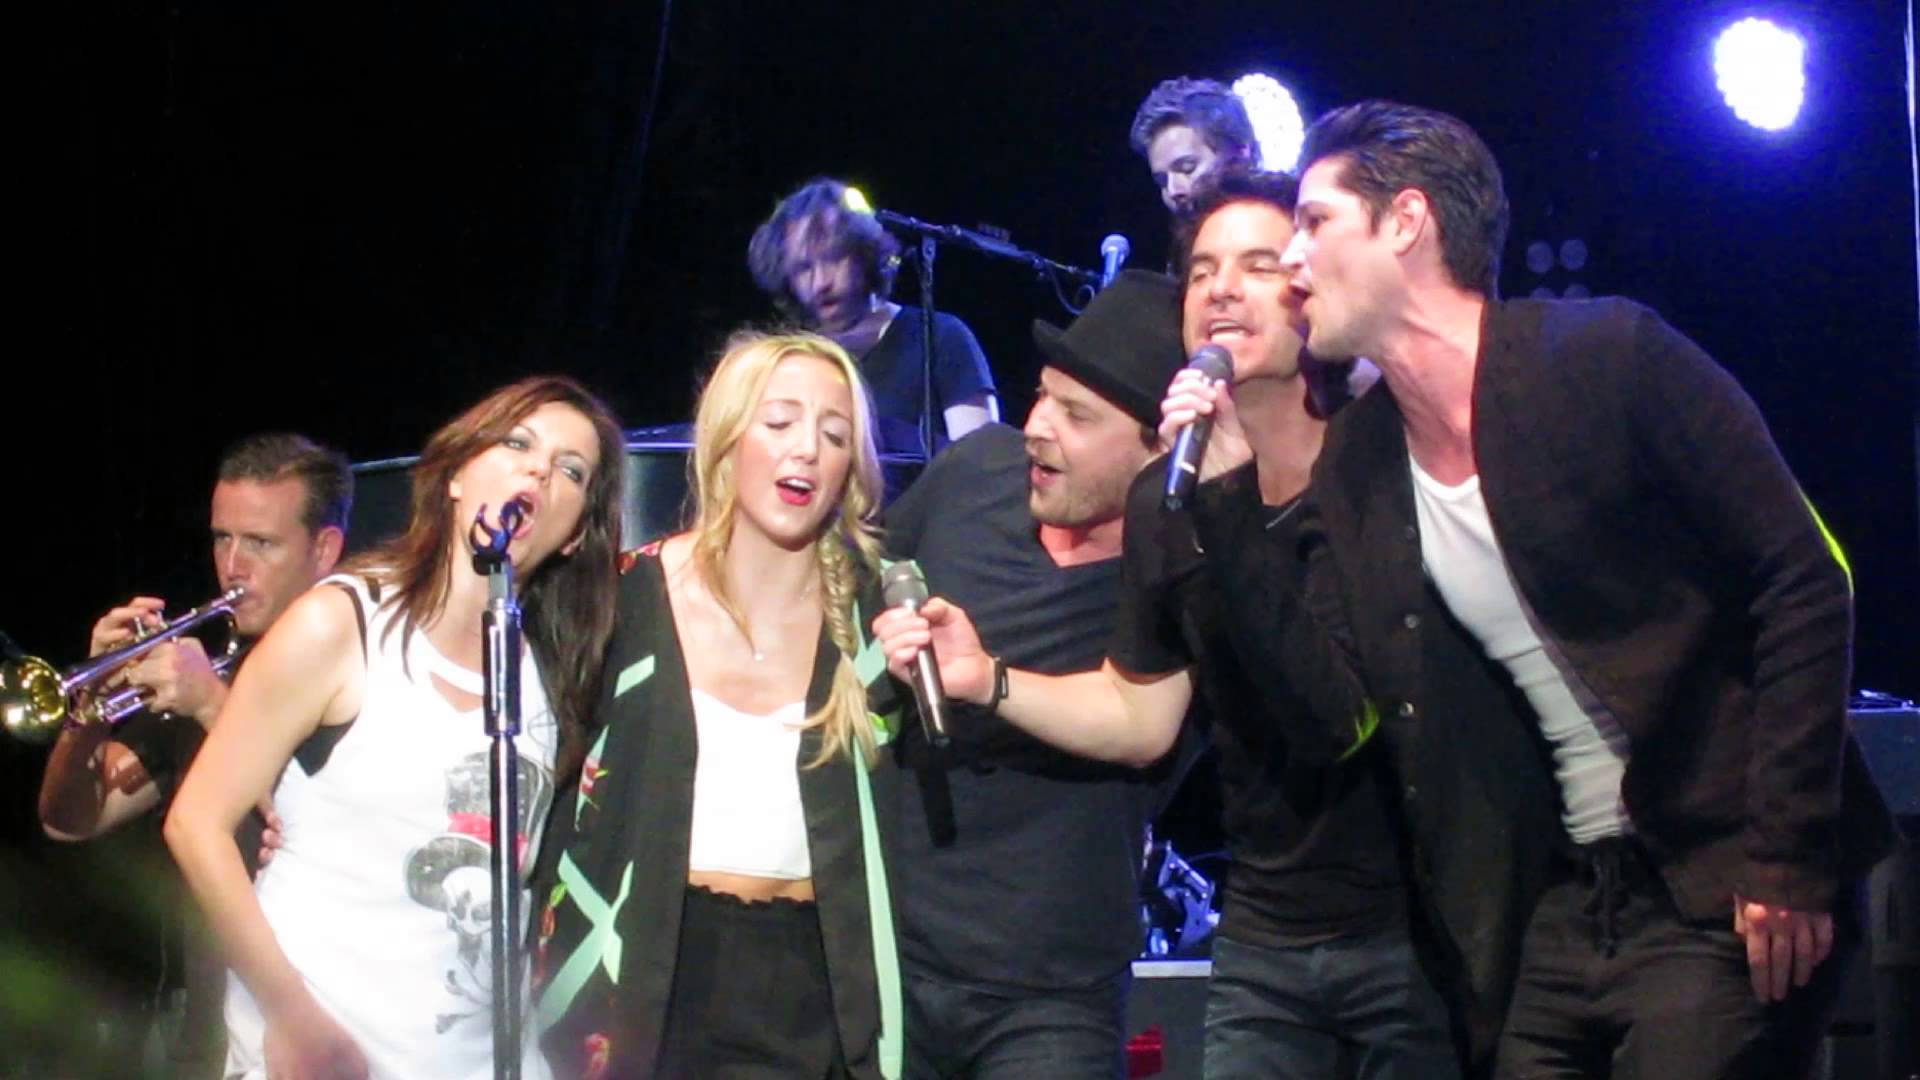 Train, DeGraw and The Script